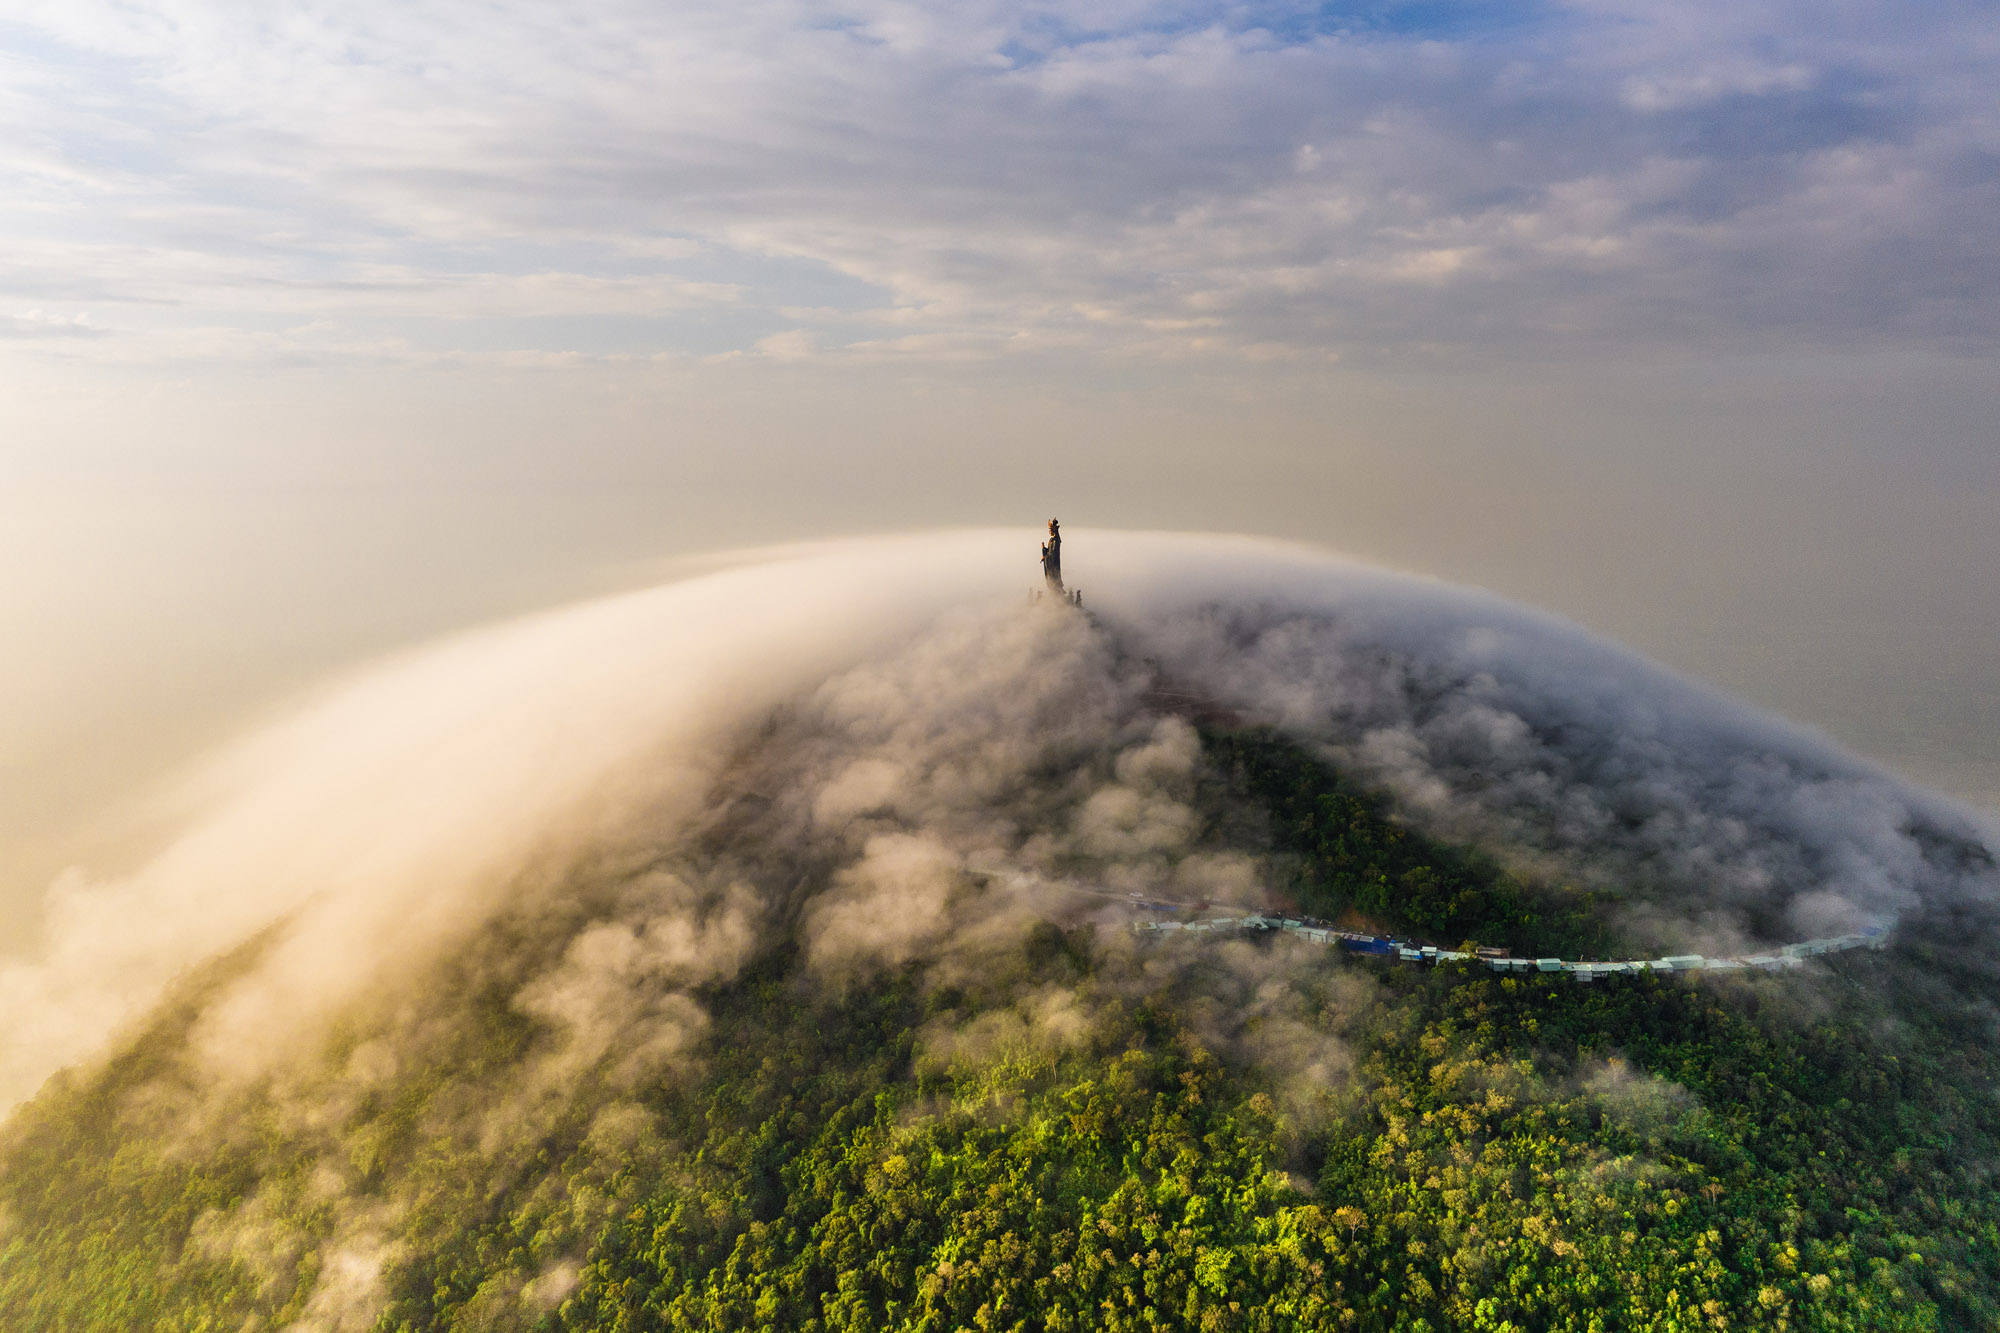 A Buddha statue at the top of a green mountain covered in a cloud